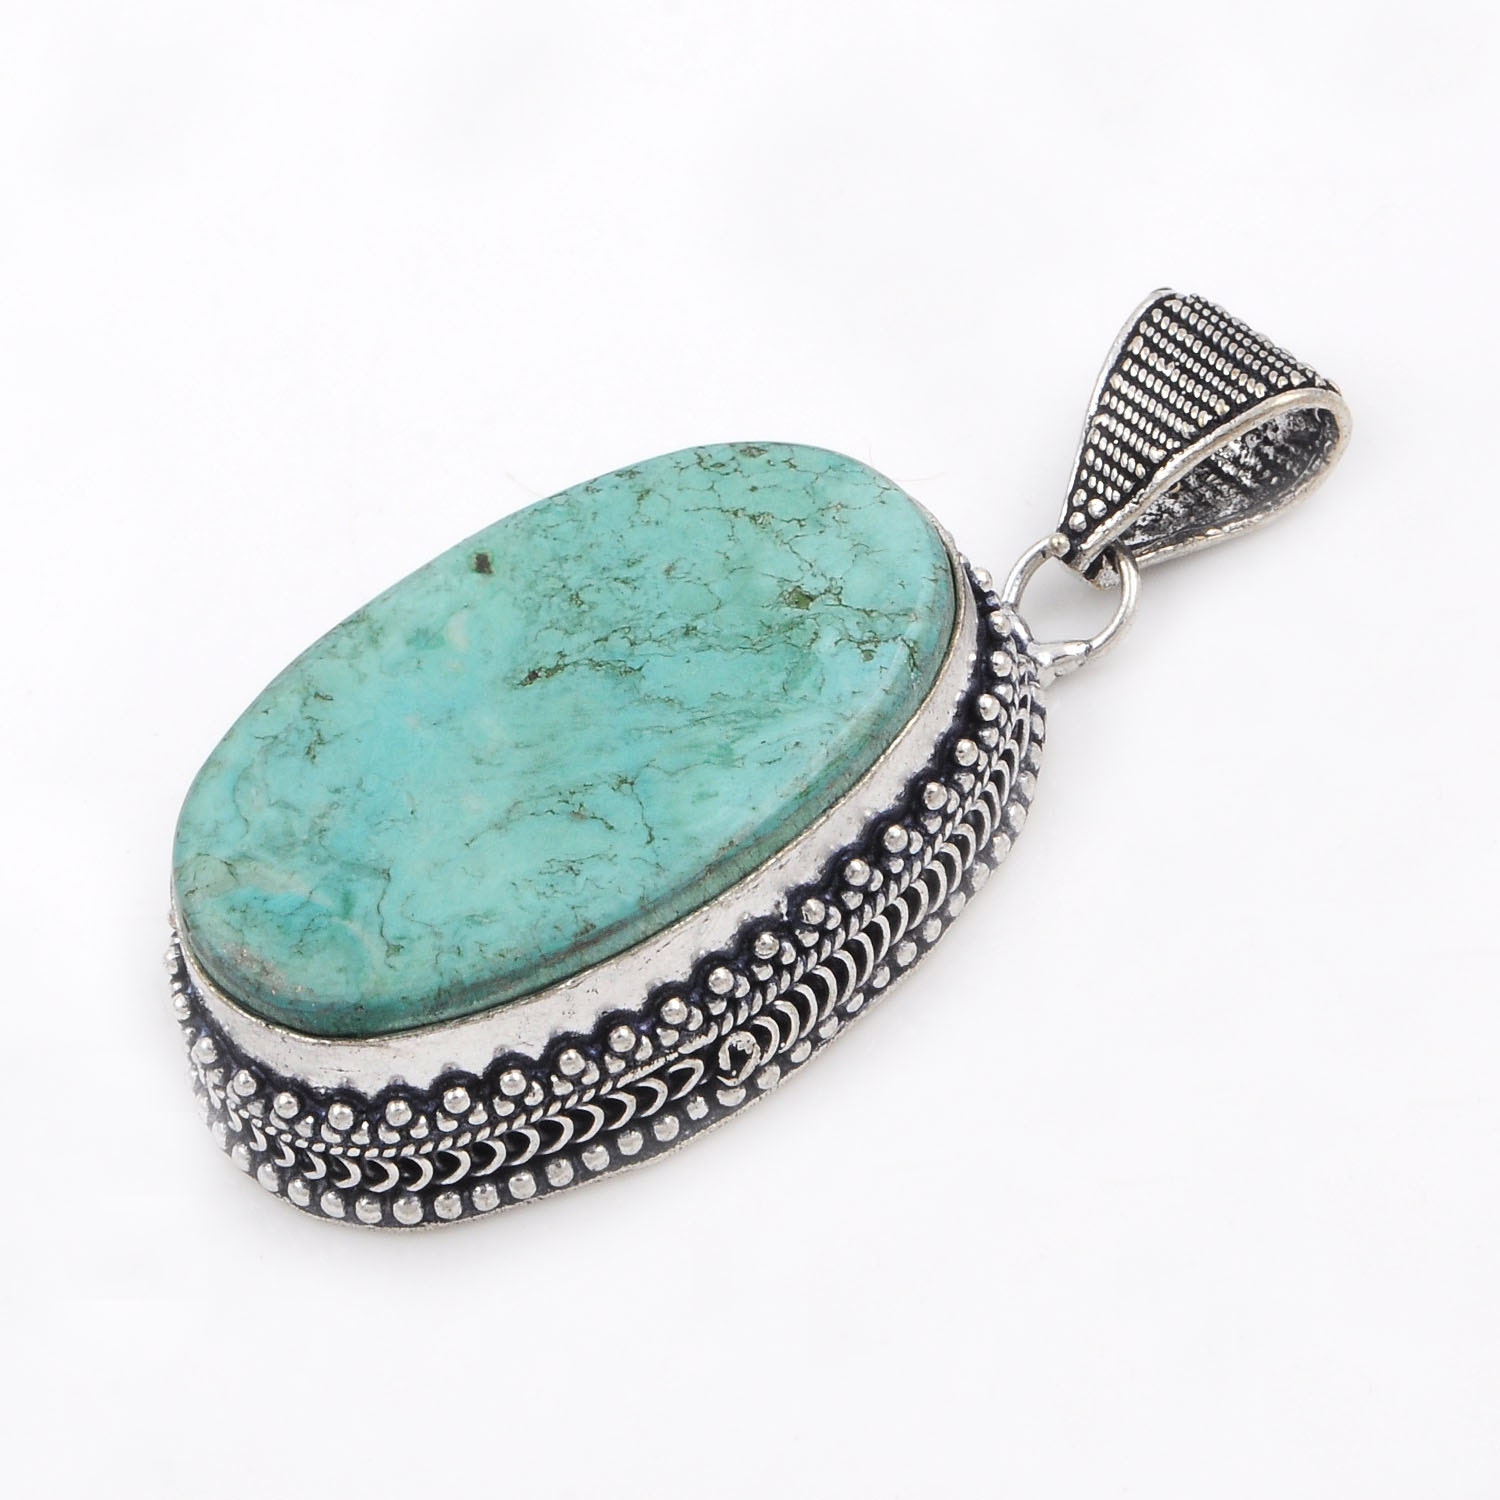 Turquoise pendant Silver Pendant Turquoise by Sterling925jewelry